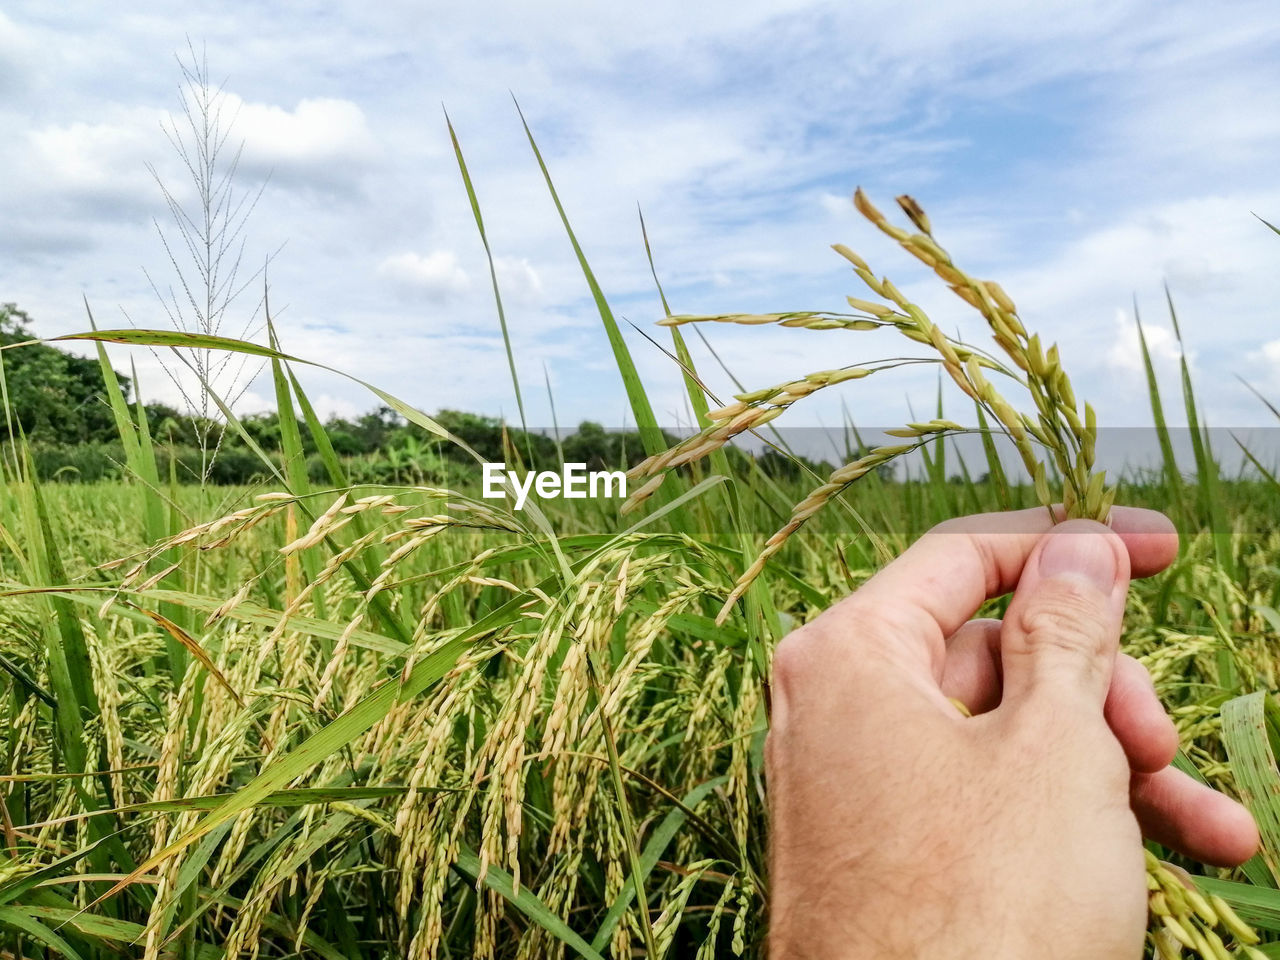 Cropped image of hand holding crops against sky